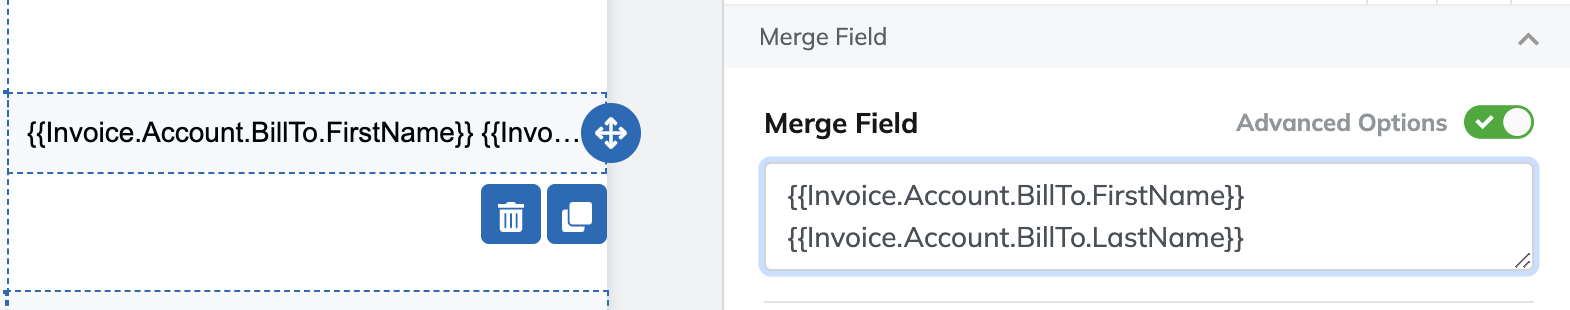 HTML_invoice_template_Advanced_Options_merge_fields.png